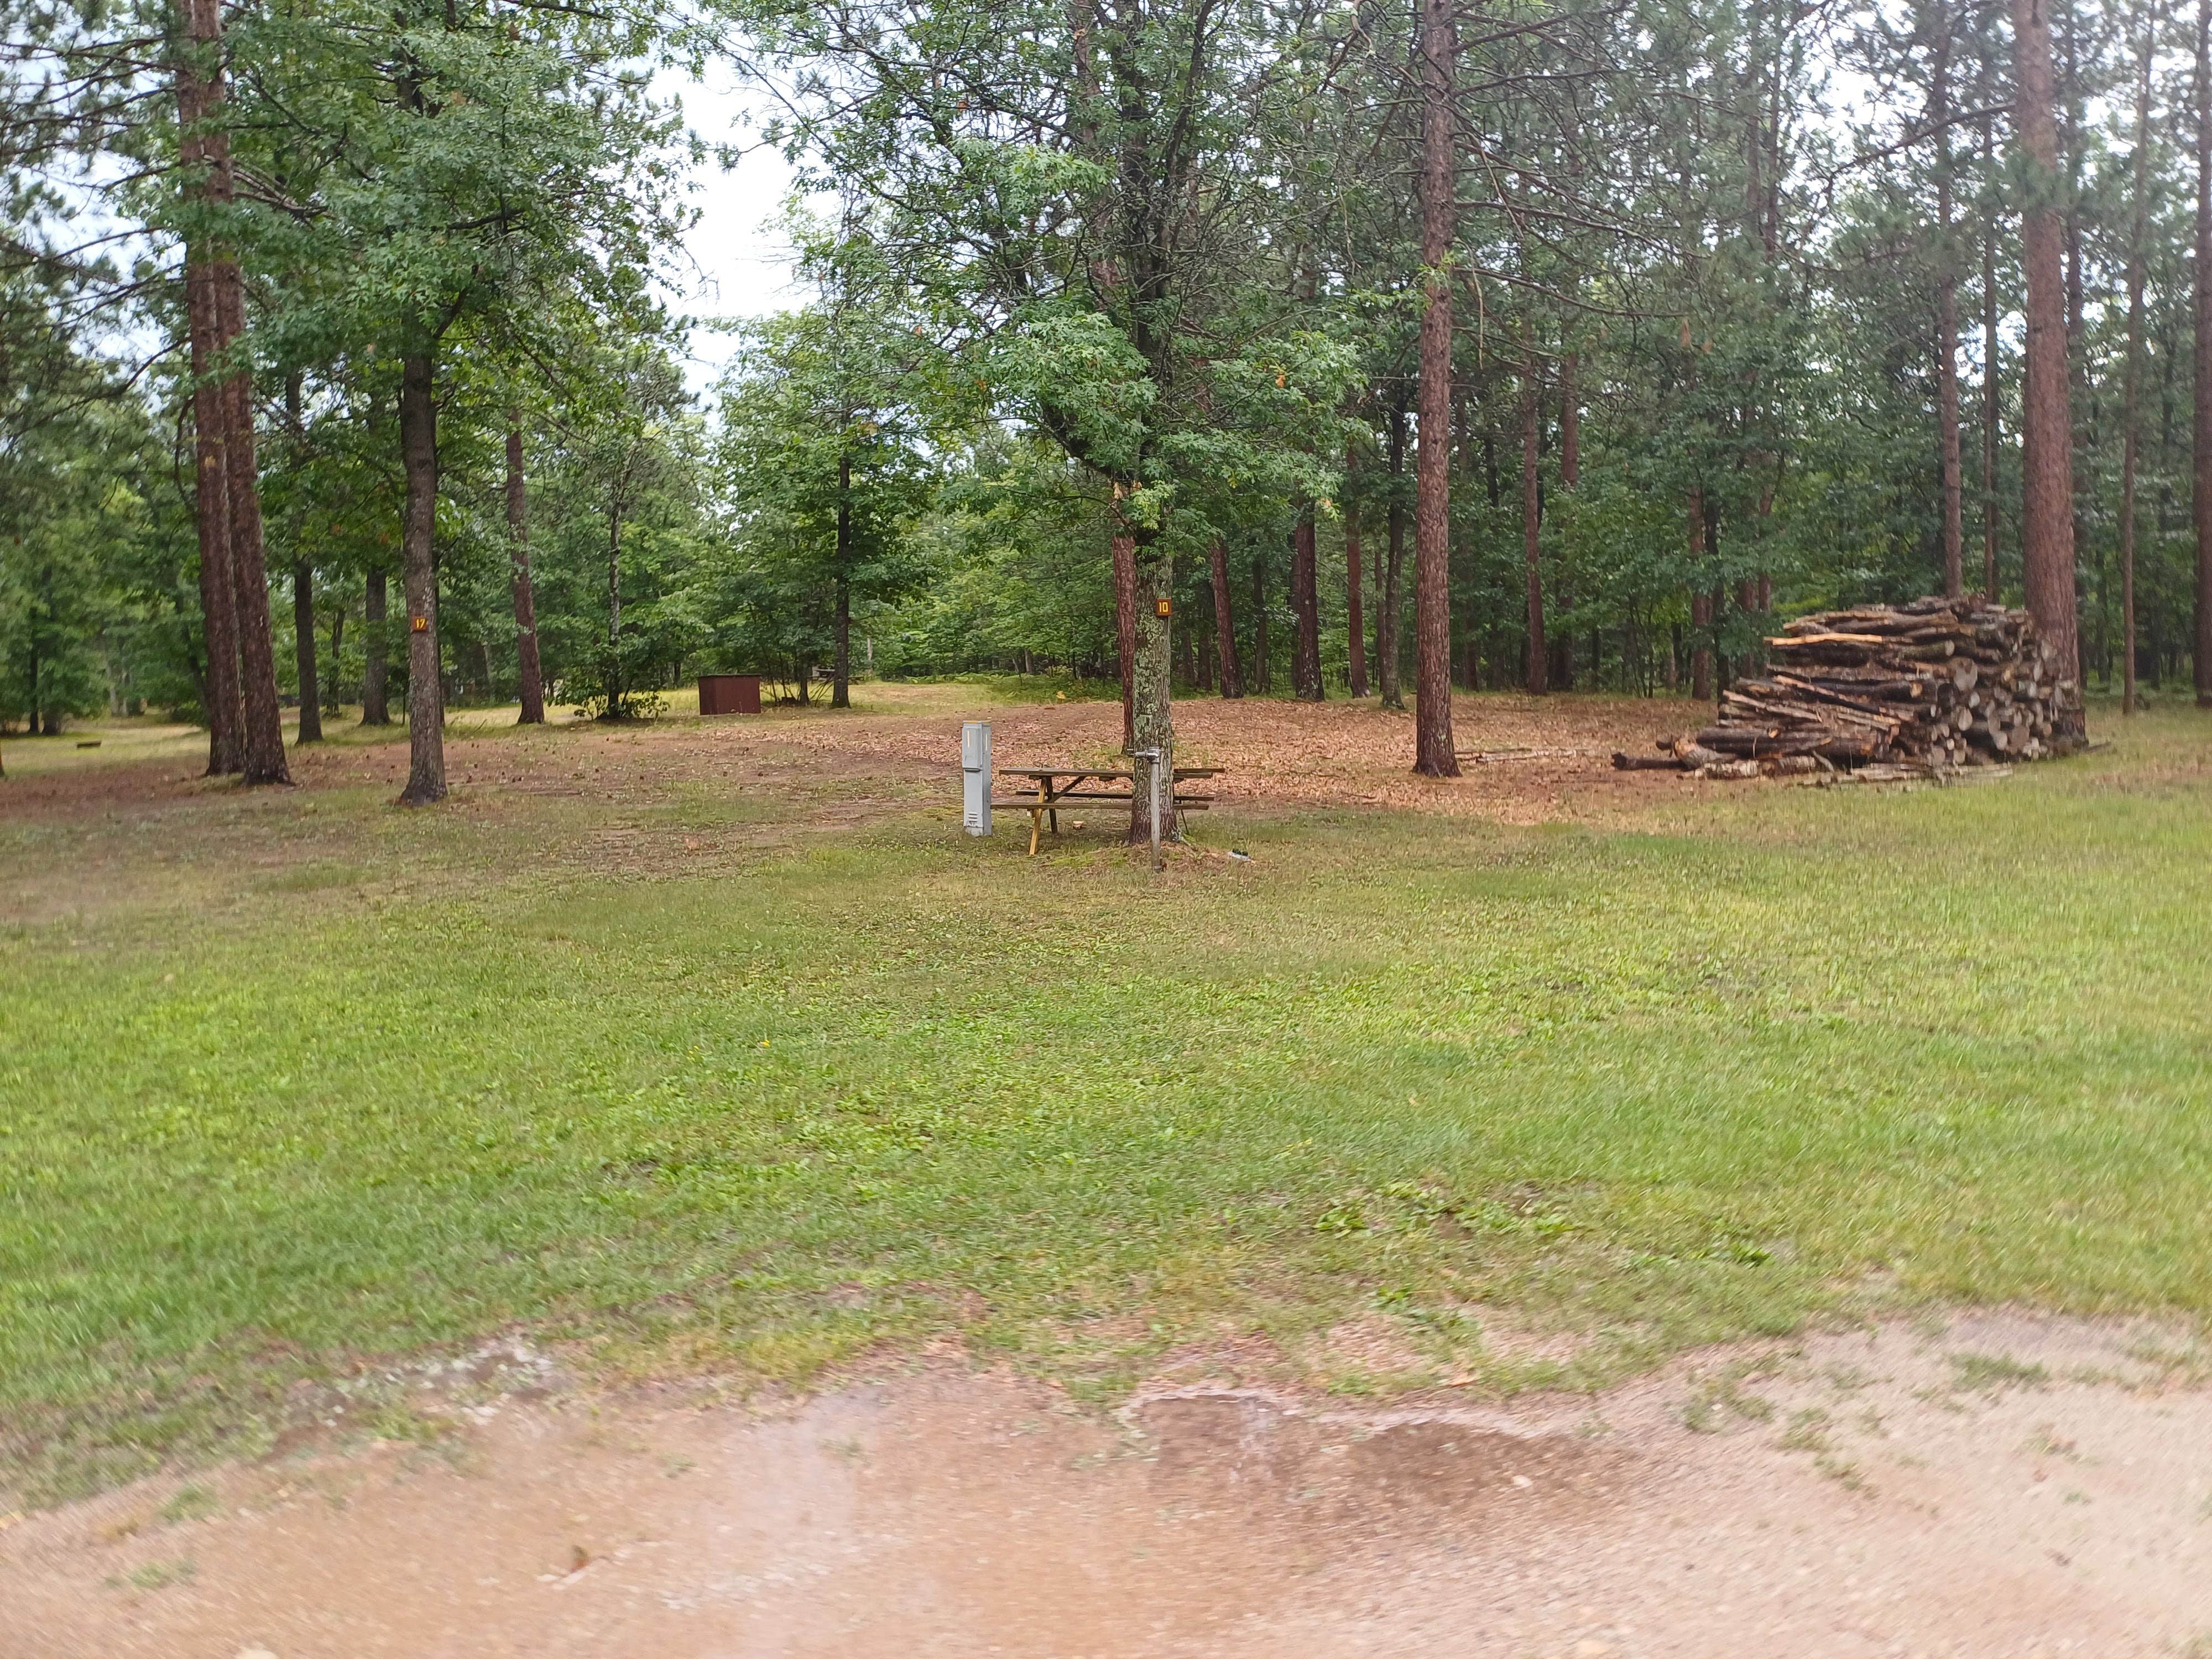 Camper submitted image from Vagabond Resort and Campground - 5